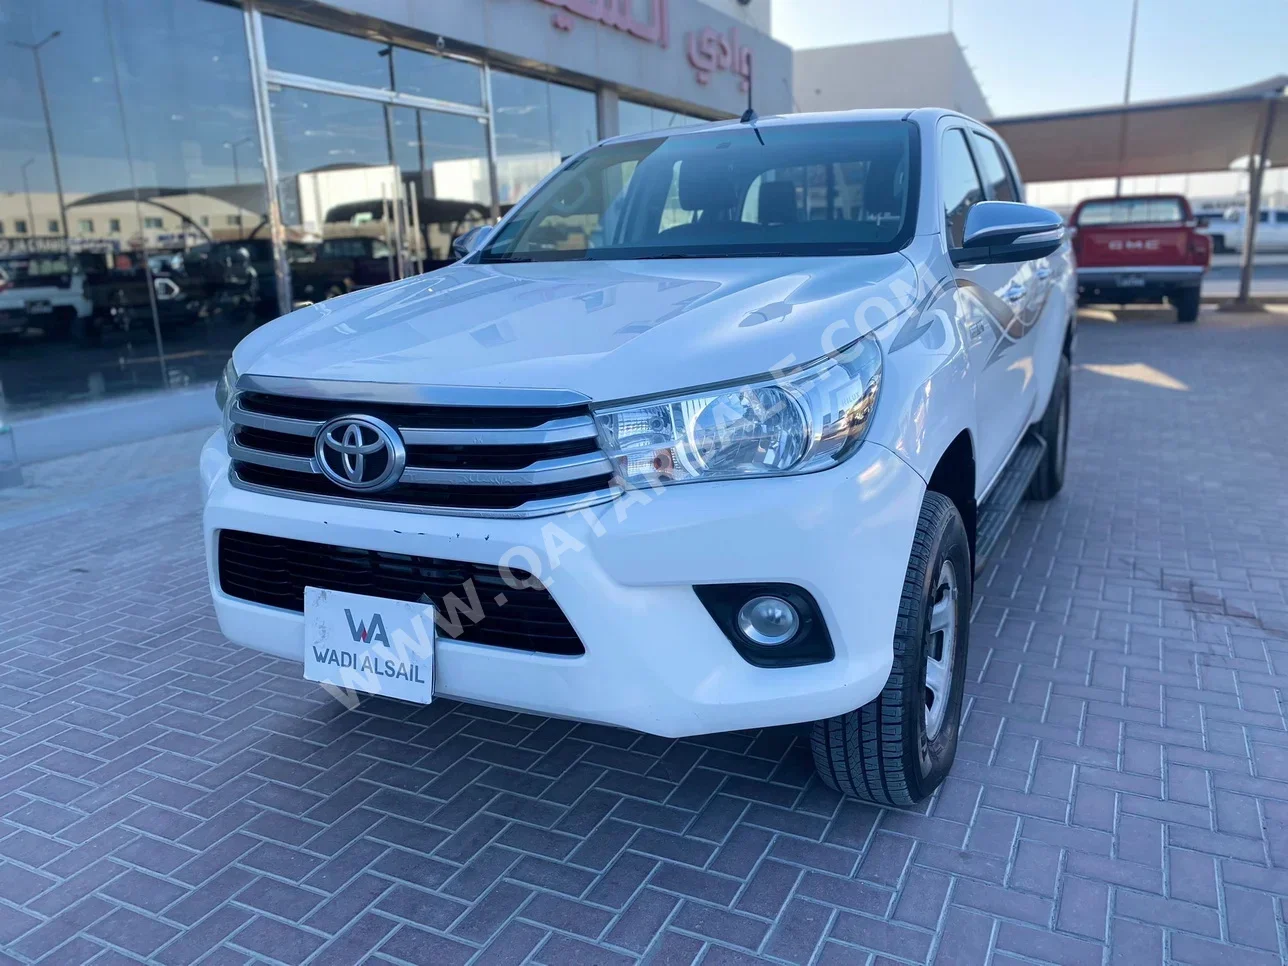 Toyota  Hilux  SR5  2017  Manual  138,000 Km  4 Cylinder  Four Wheel Drive (4WD)  Pick Up  White